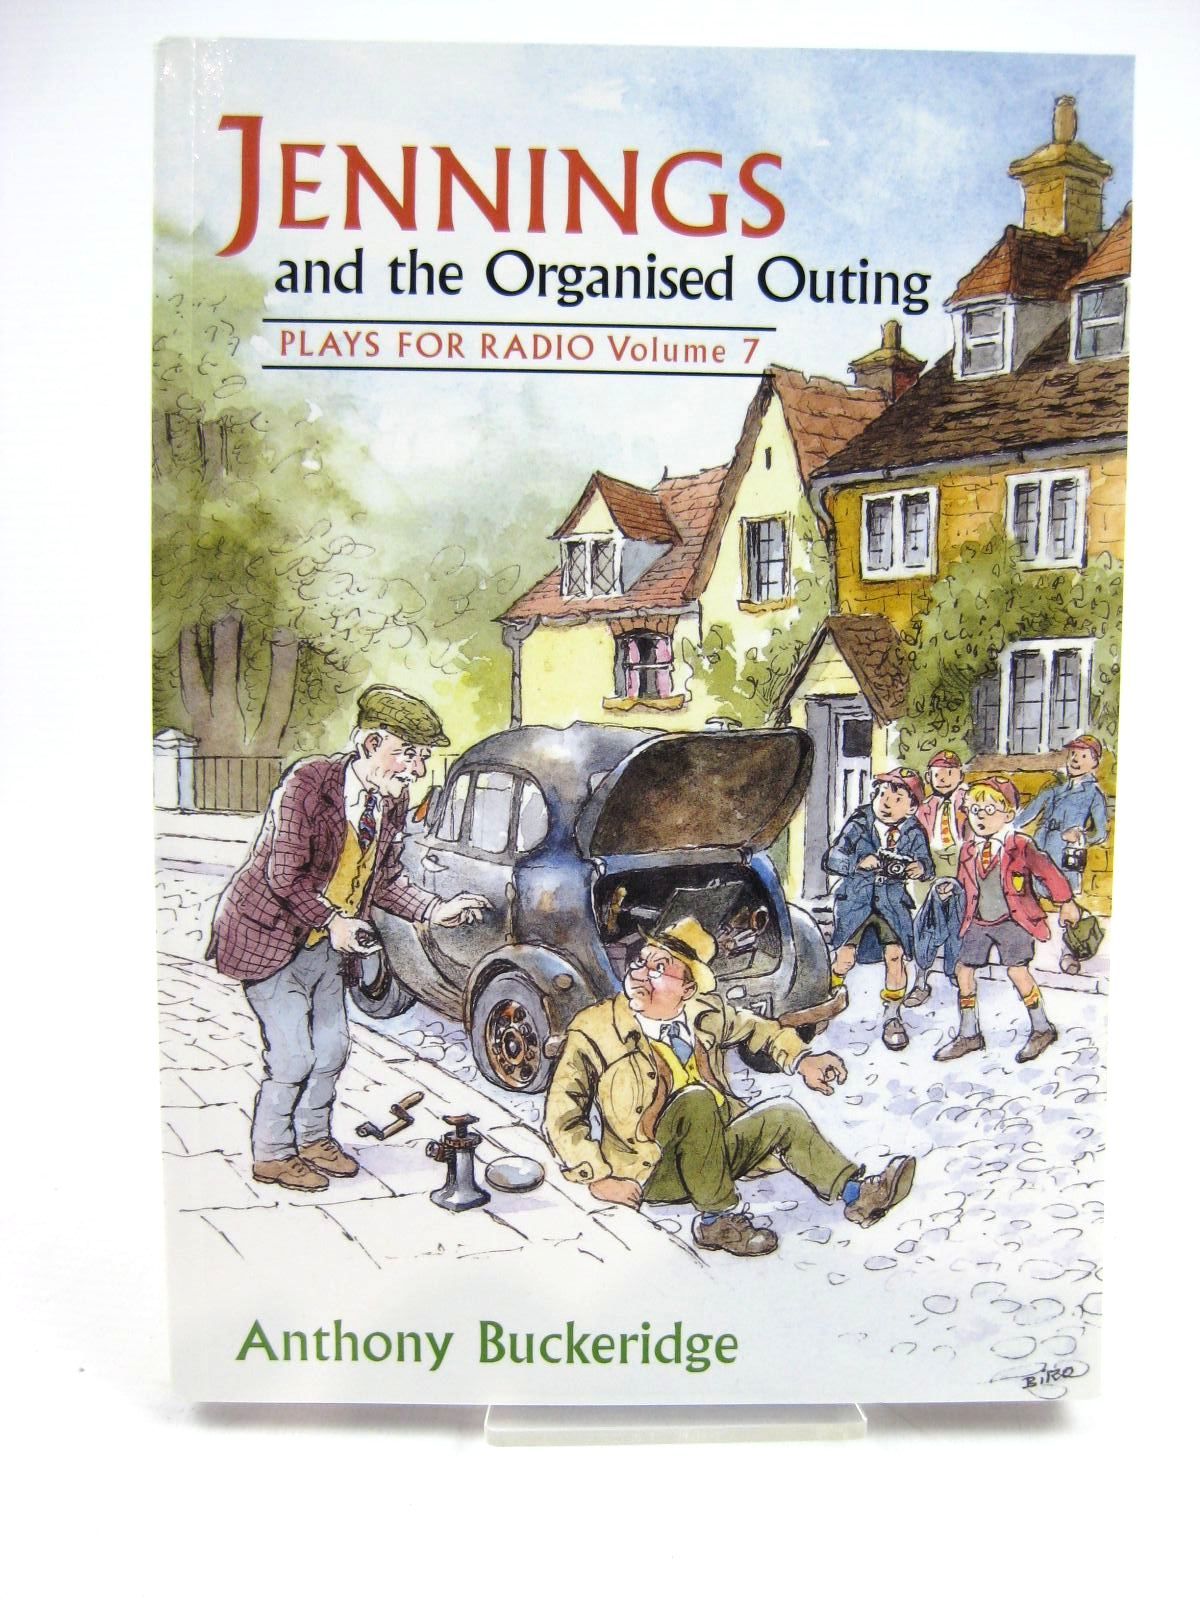 Cover of JENNINGS AND THE ORGANISED OUTING by Anthony Buckeridge